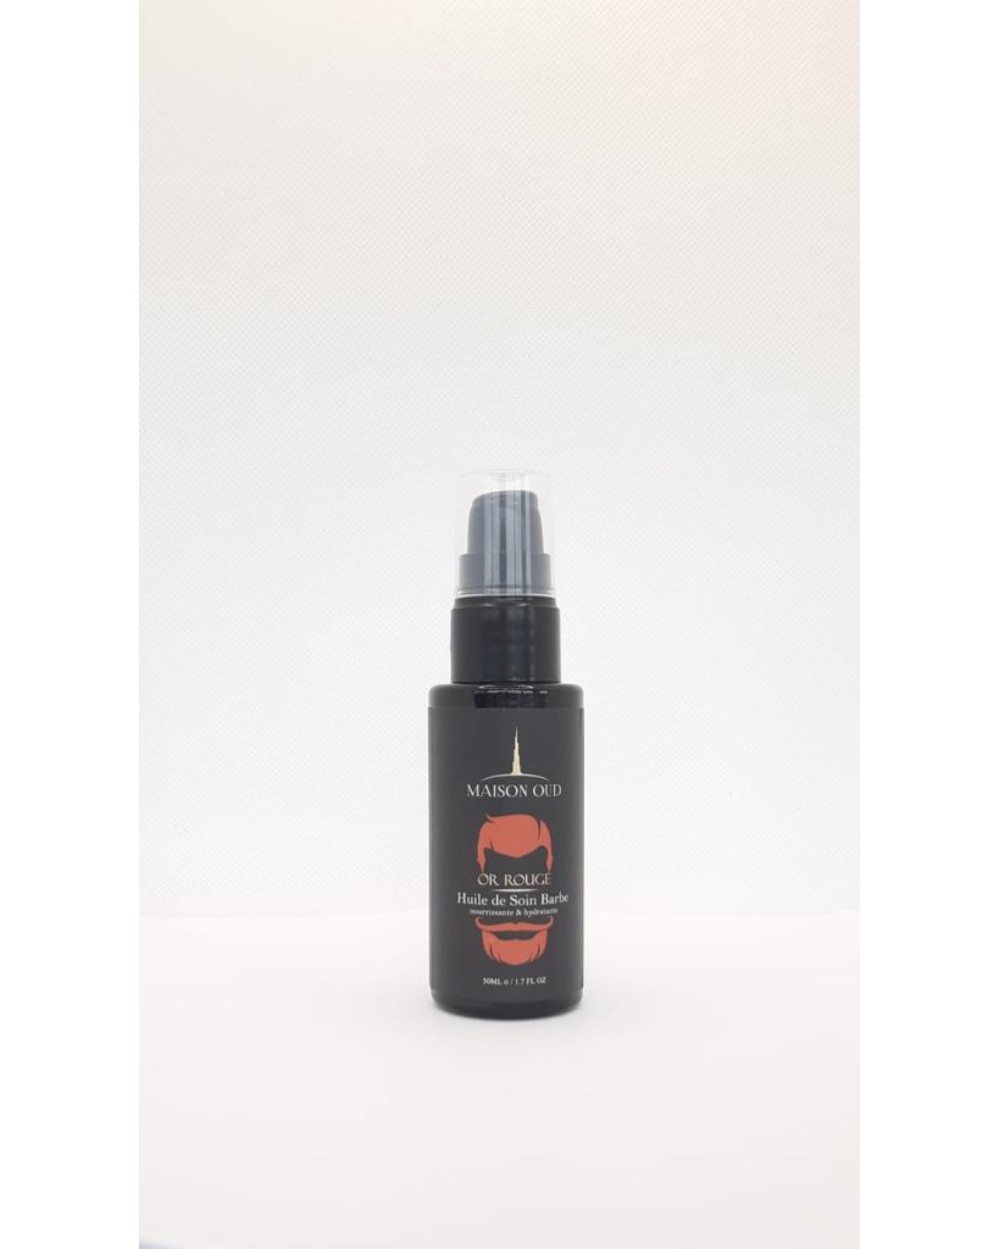 Red gold - Beard care oil - Oud House